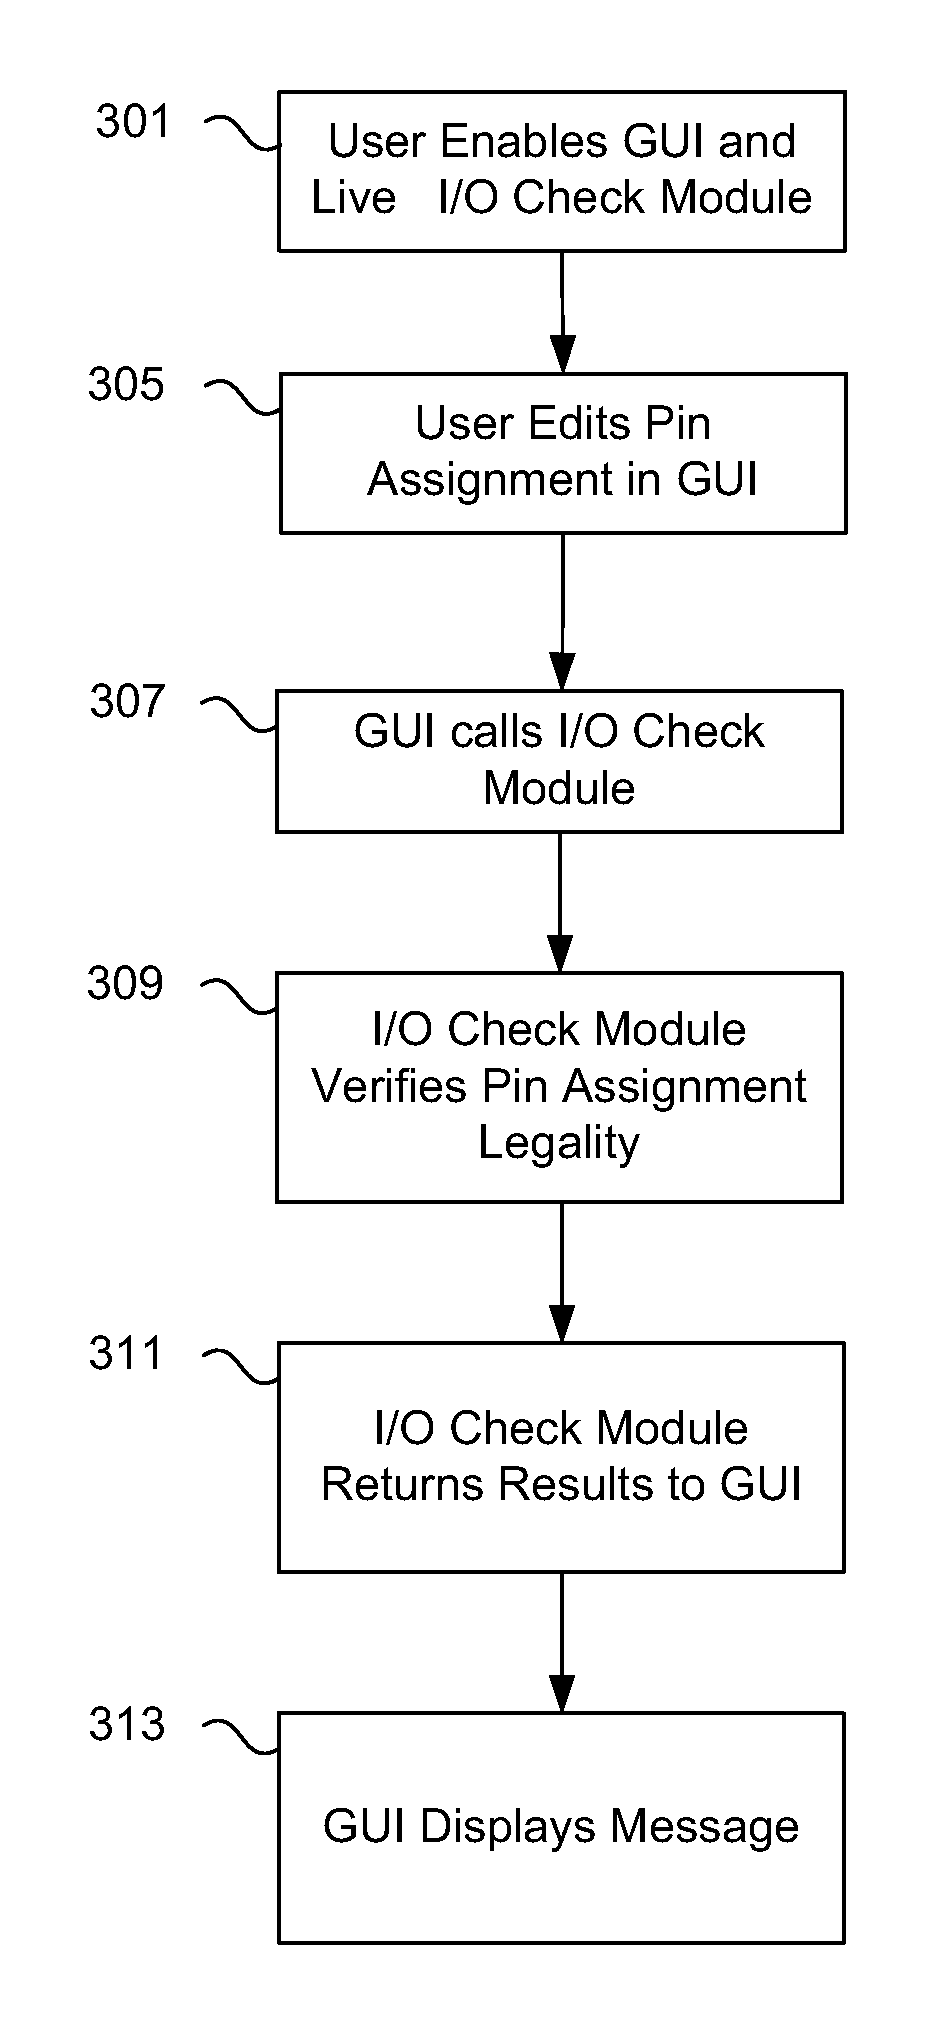 Real-time background legality verification of pin placement